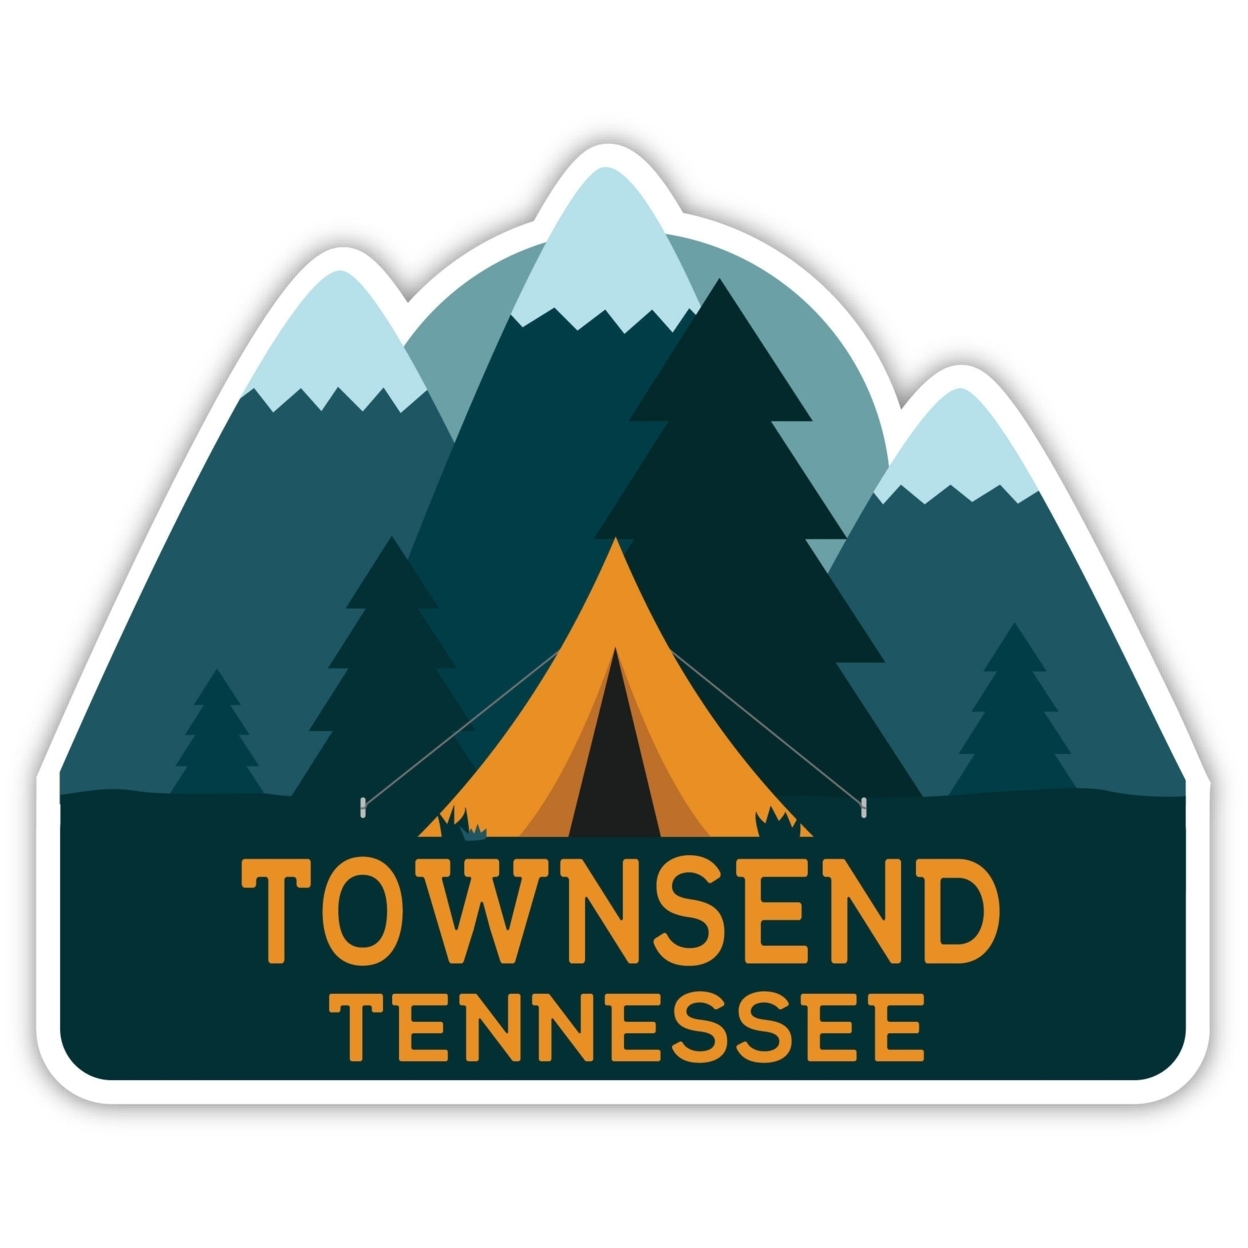 Townsend Tennessee Souvenir Decorative Stickers (Choose Theme And Size) - Single Unit, 2-Inch, Adventures Awaits